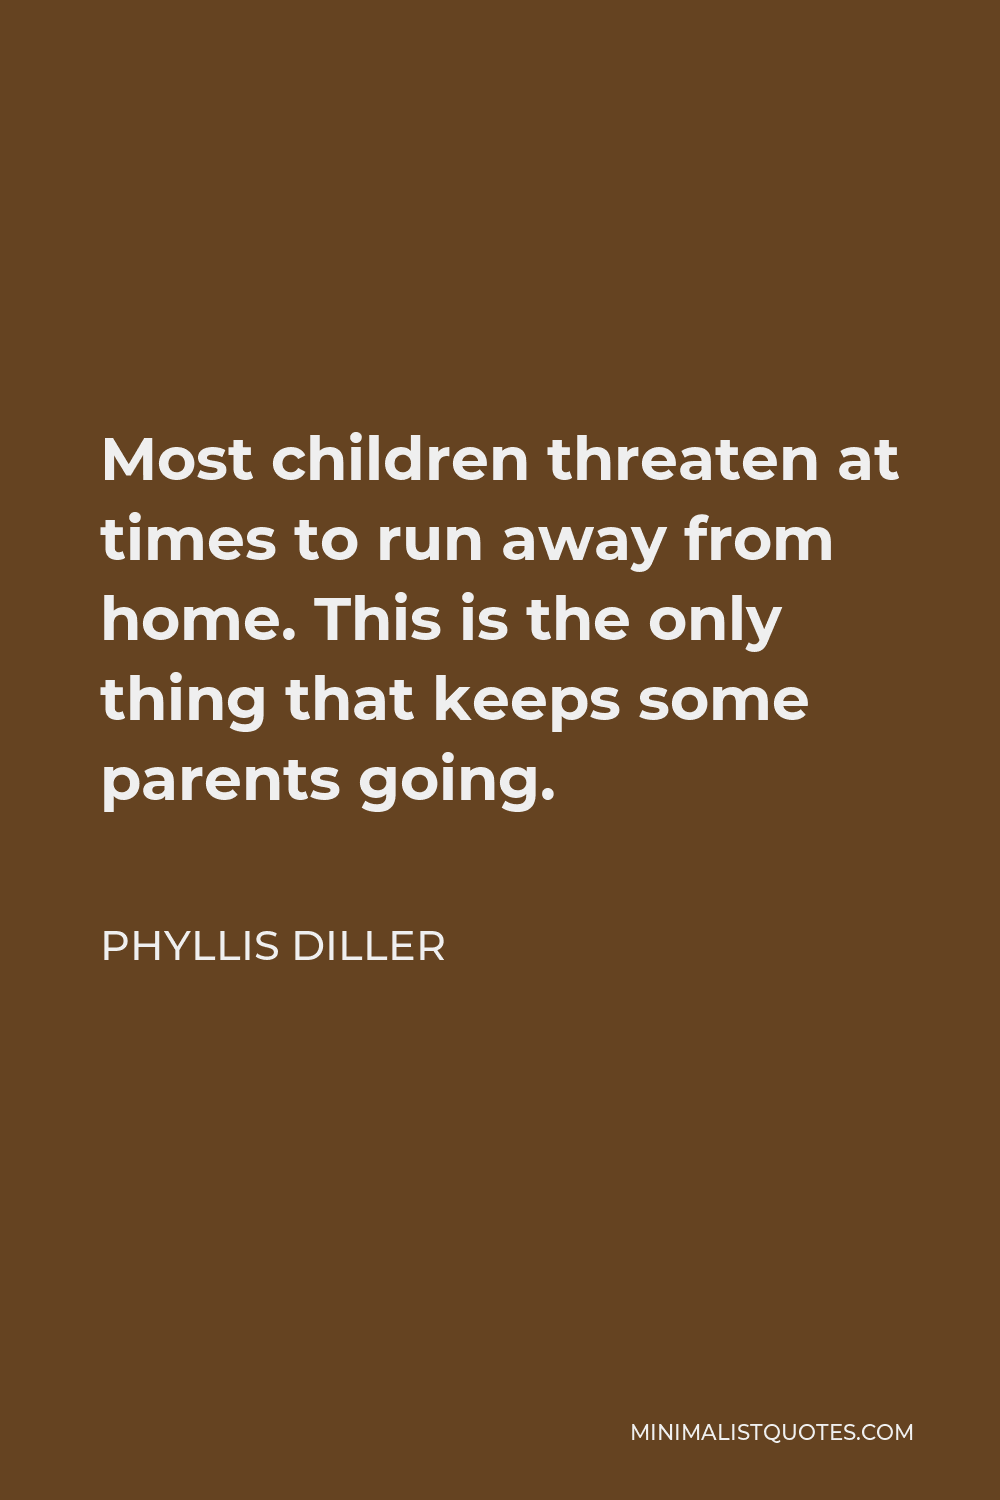 Phyllis Diller Quote - Most children threaten at times to run away from home. This is the only thing that keeps some parents going.